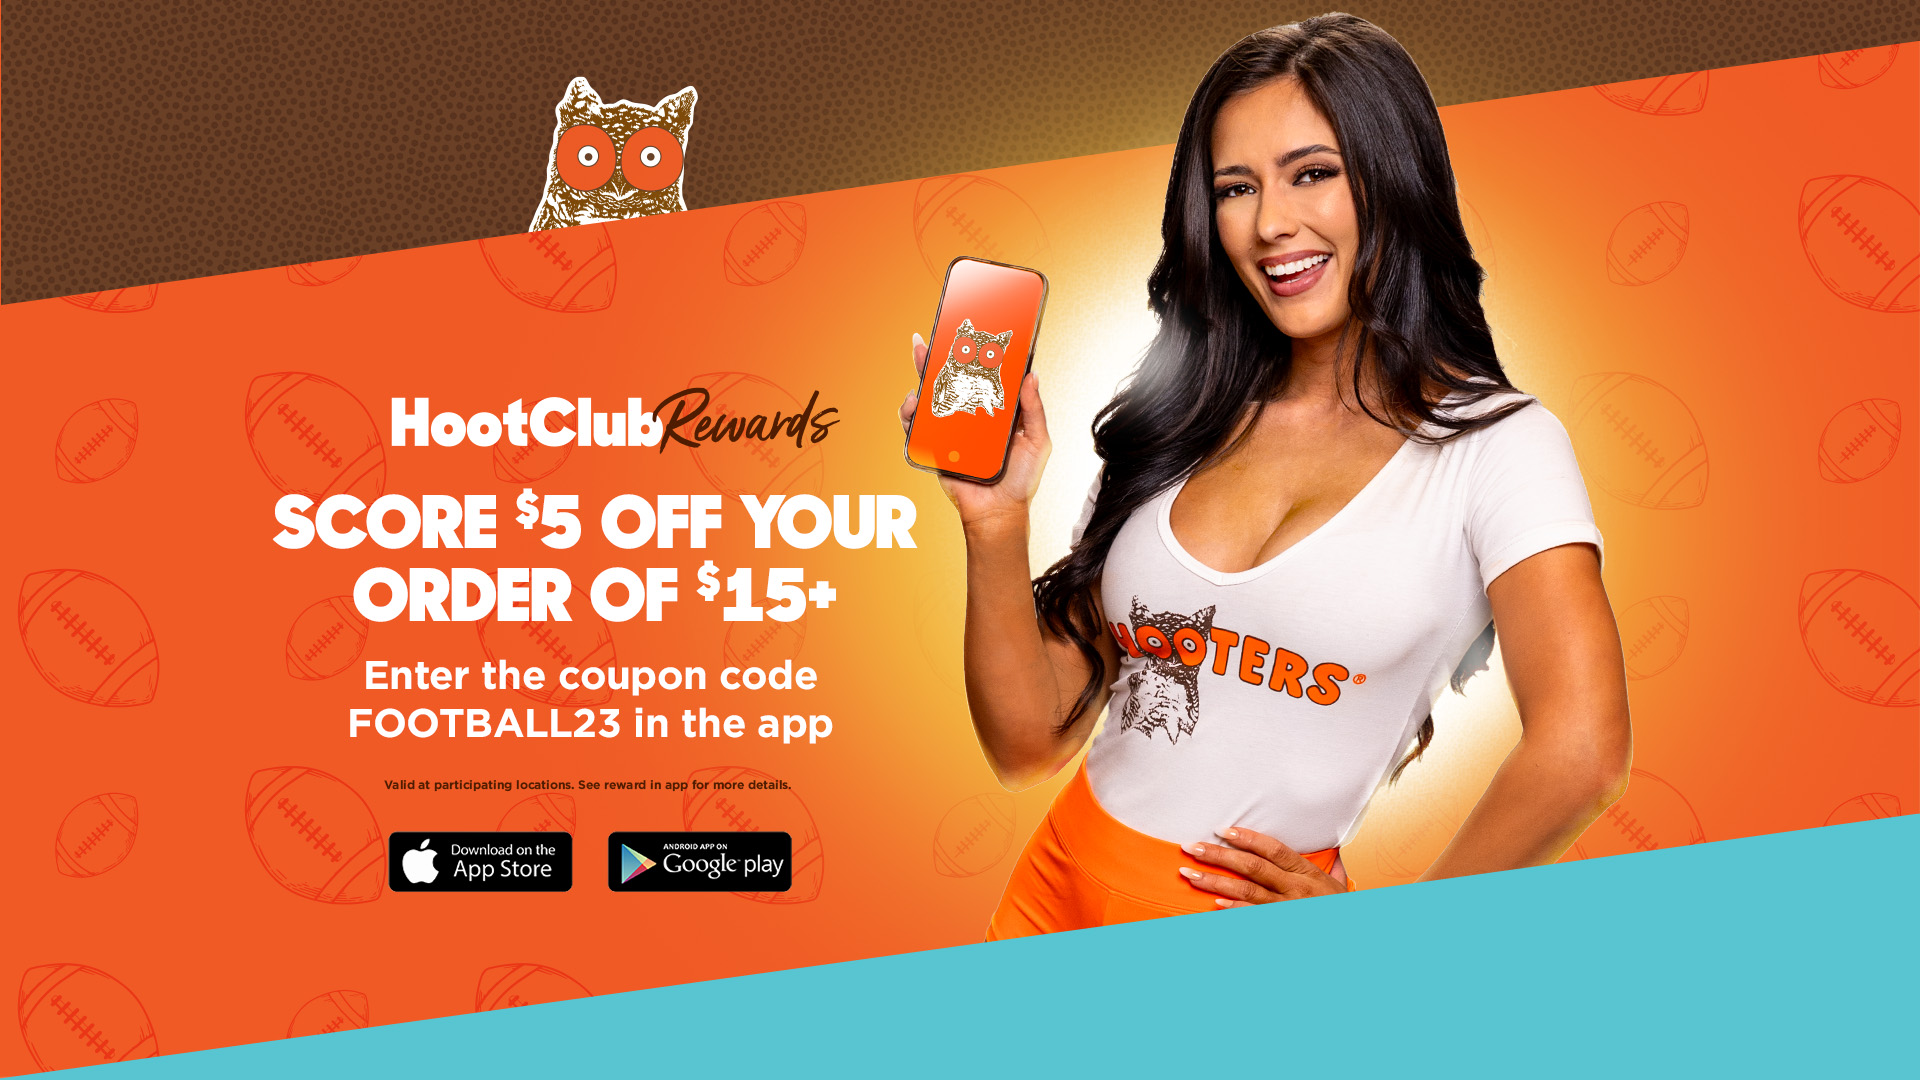 HootClubRewards Score $5 off your order of $15